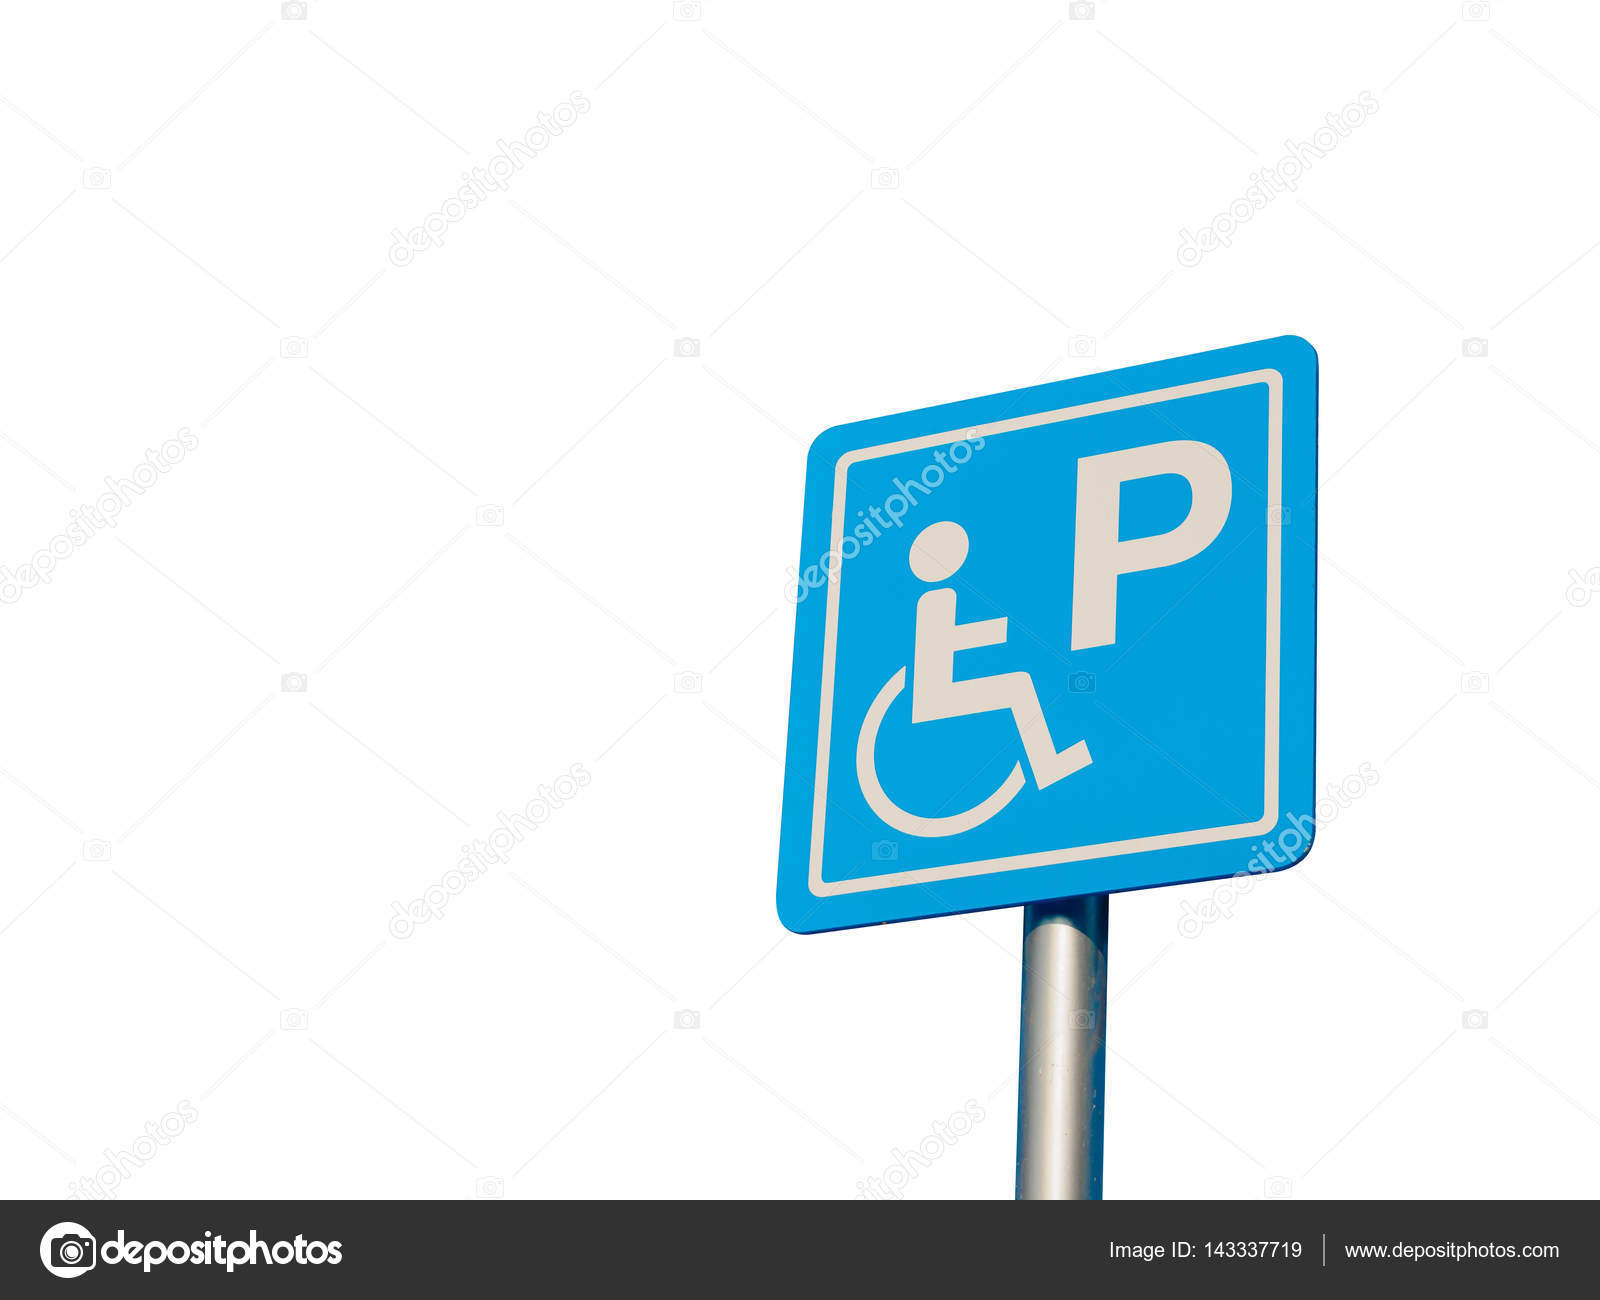 Disabled parking space and wheelchair way sign and symbols on a pole ...